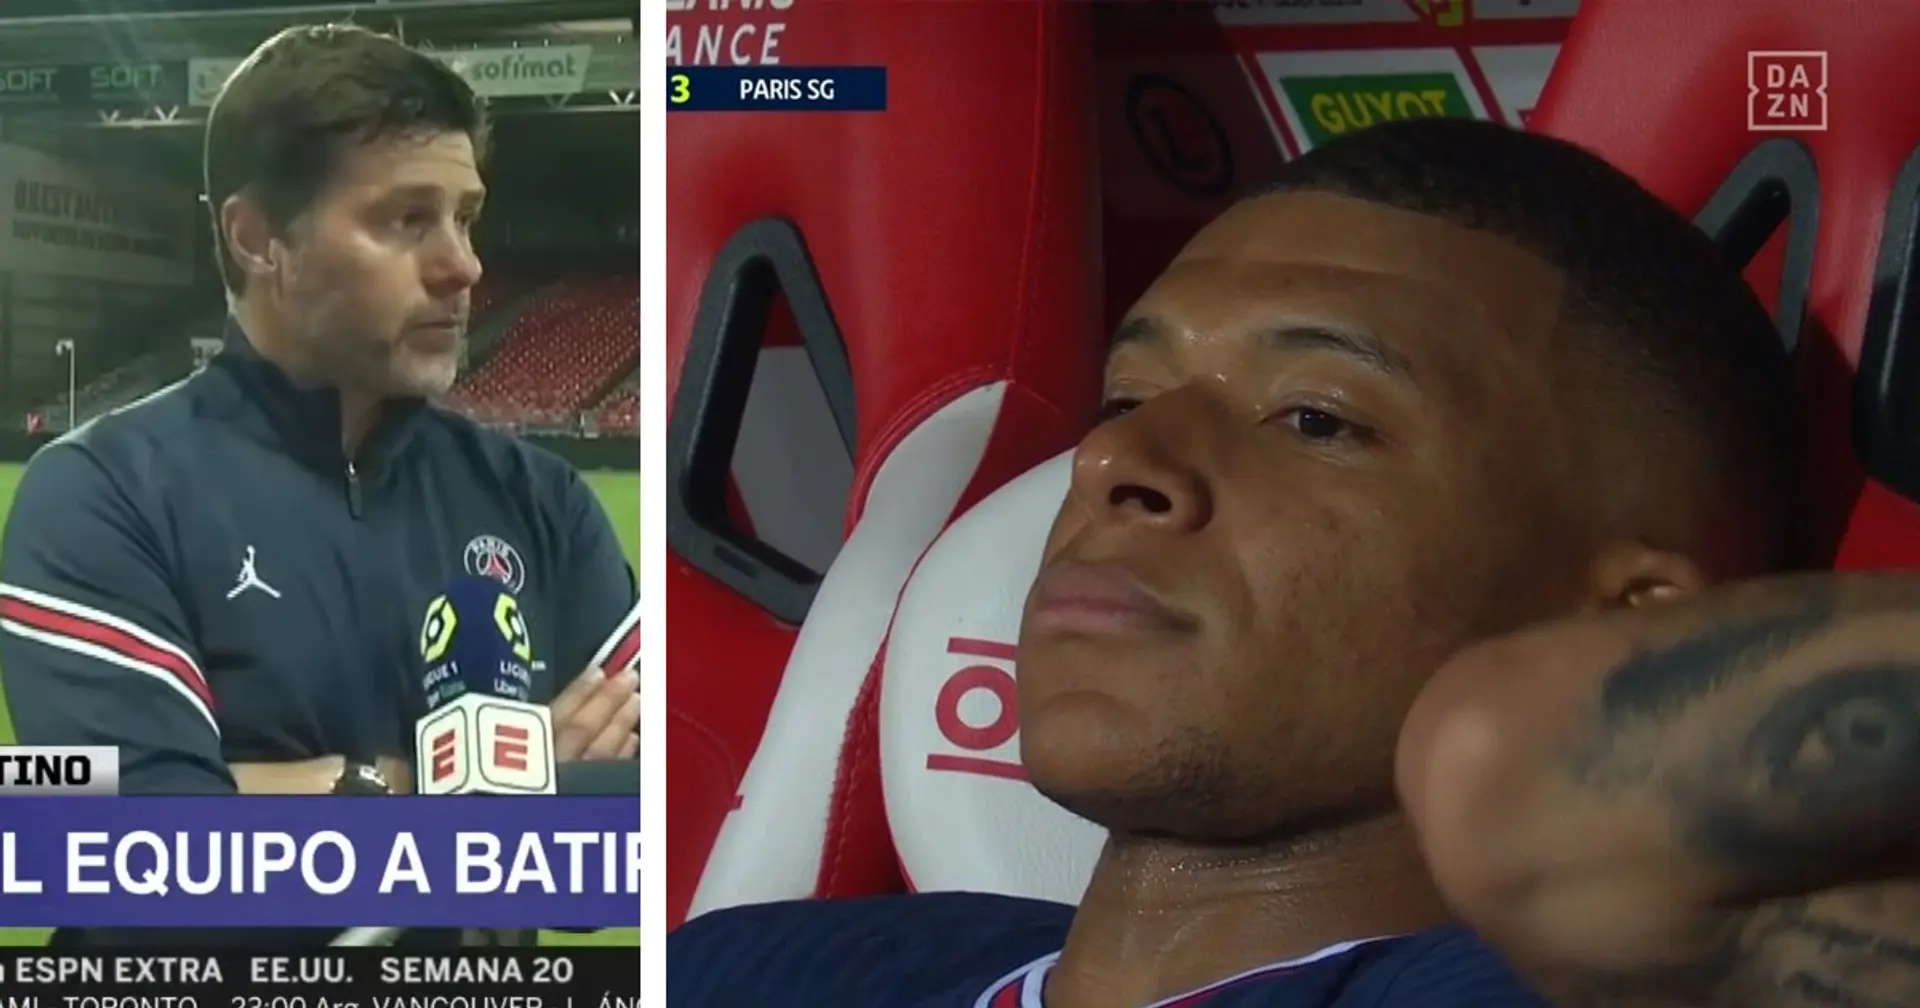 Pochettino opens up on Mbappe relationship after subbing Kylian off vs Brest